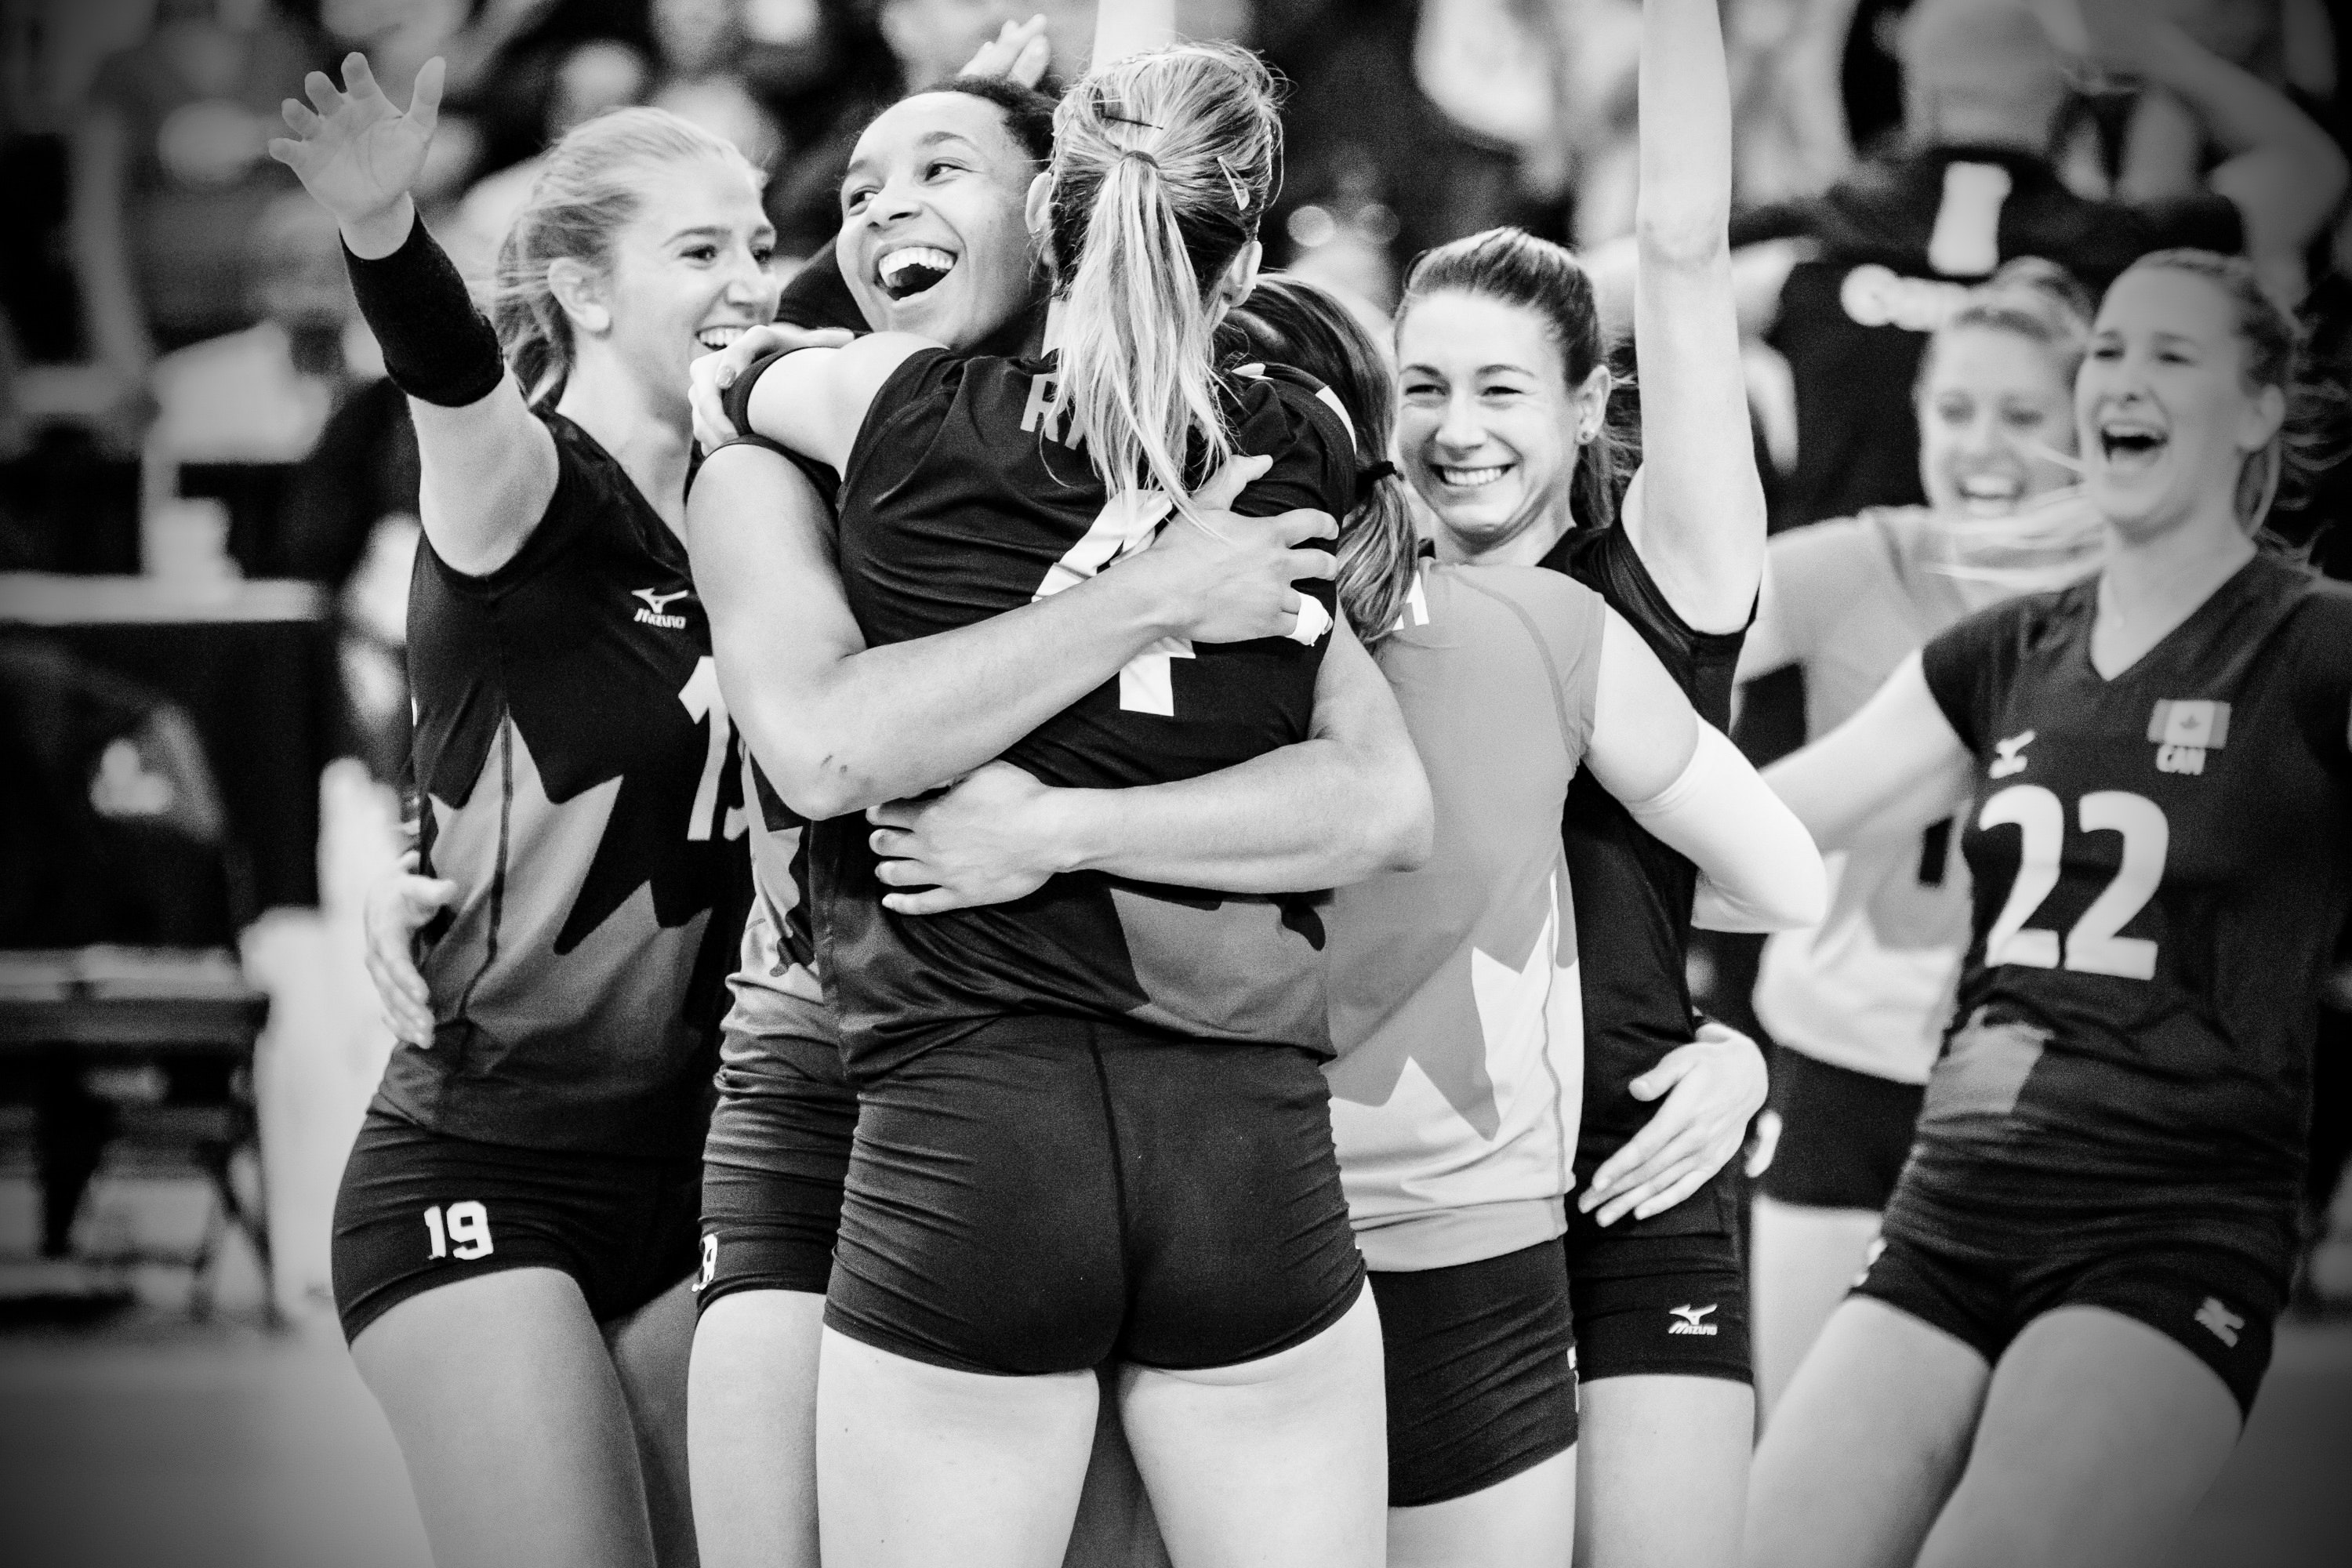 Volleyball players hugging and celebrating